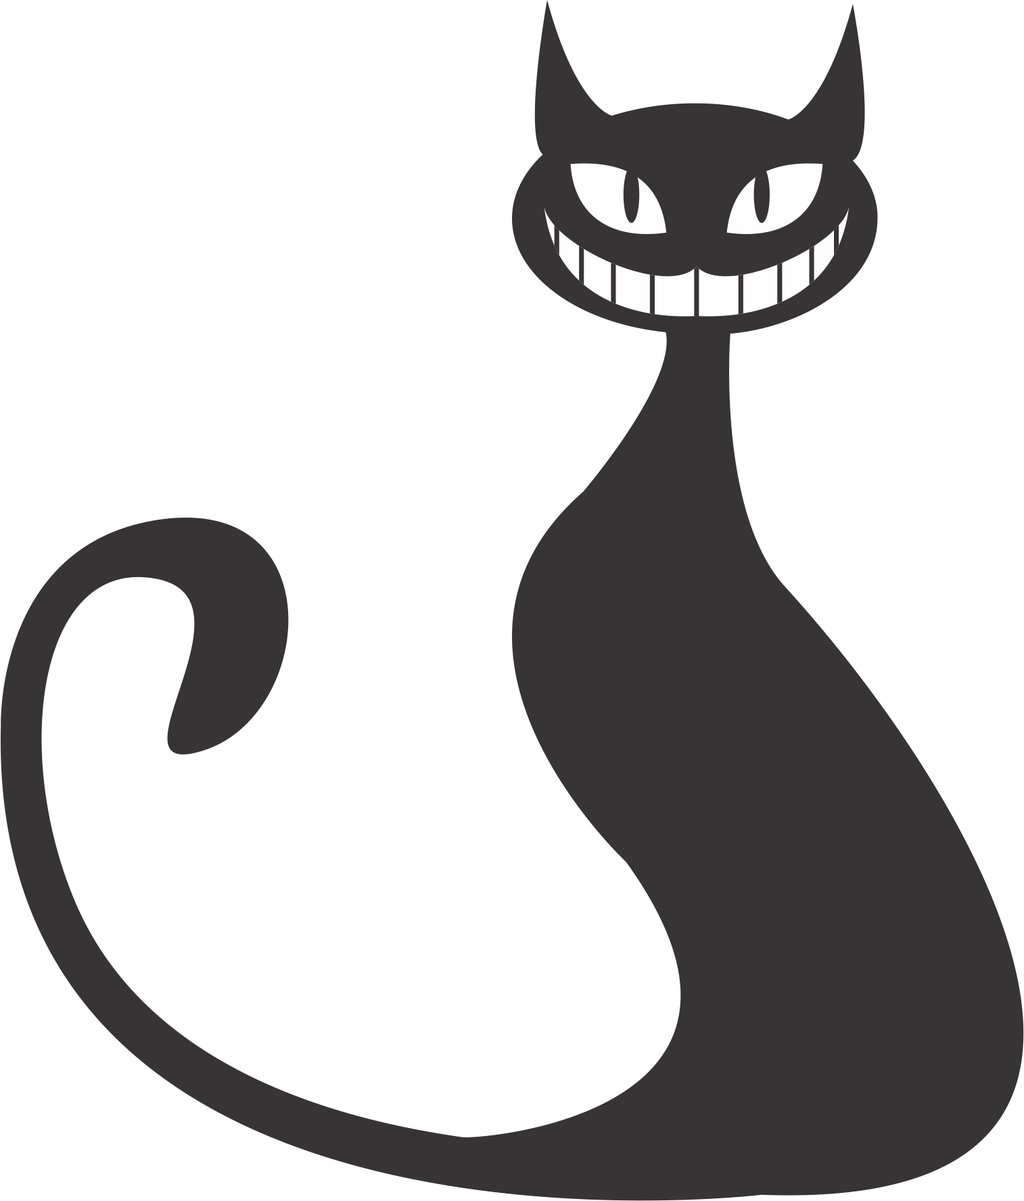 Black Cat Vector by Ricardosg89 on Clipart library